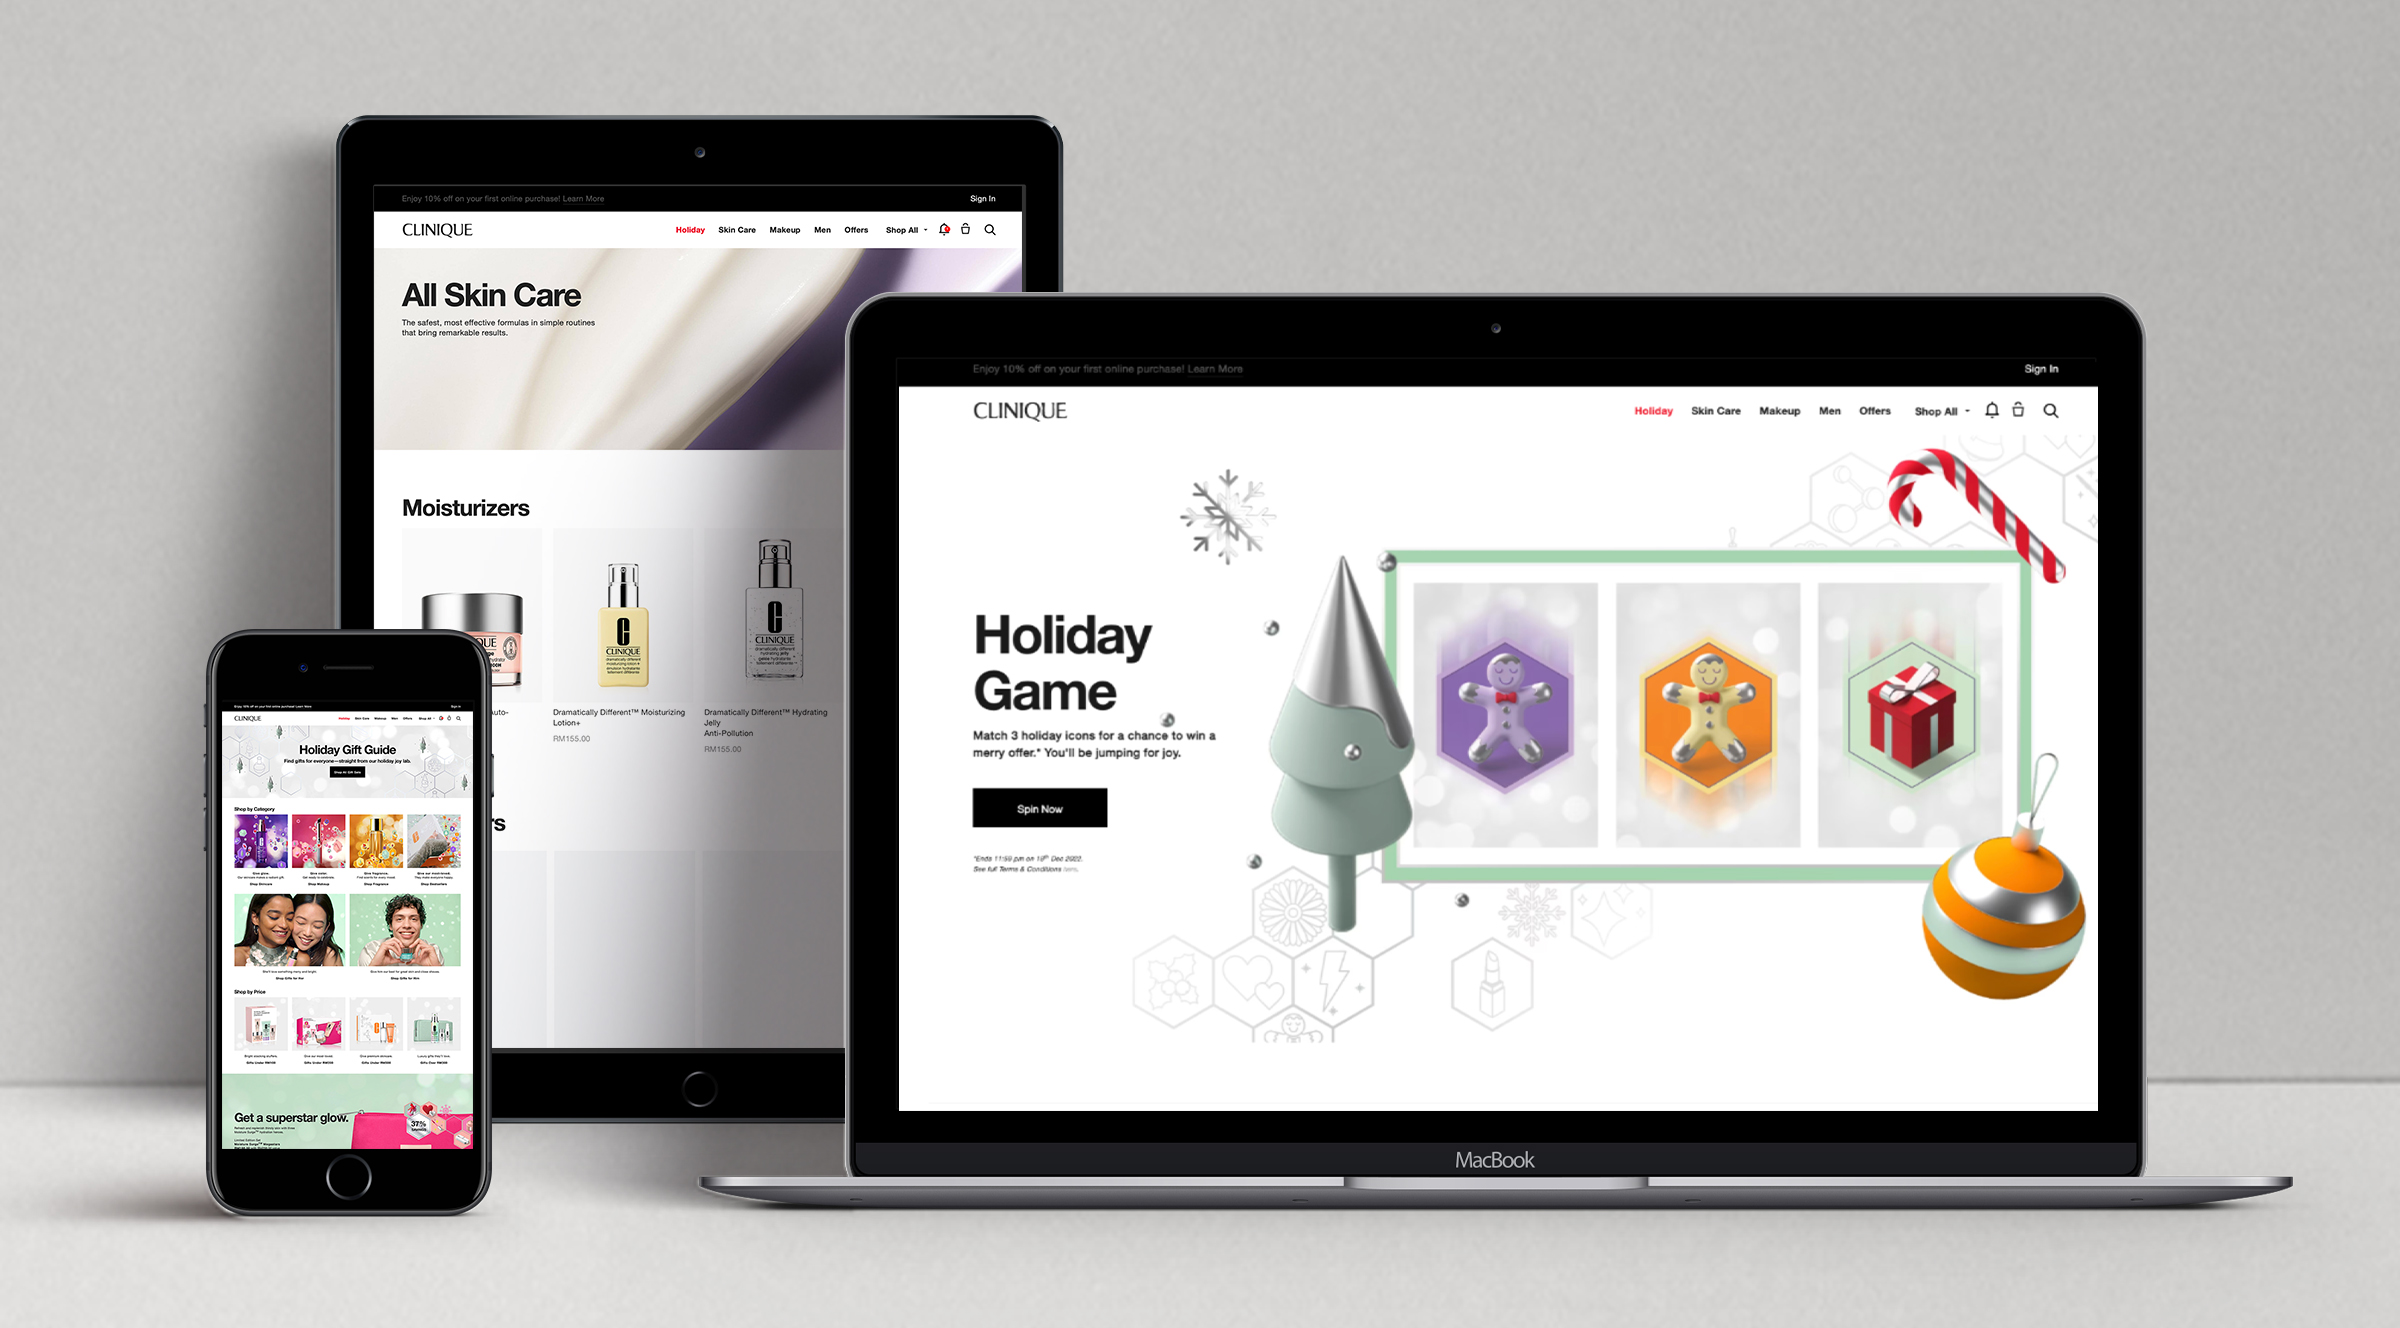 Seasonal Transformations. Adapt your online storefront with dynamic themes and campaigns to celebrate seasonal changes, keeping your site fresh and engaging.